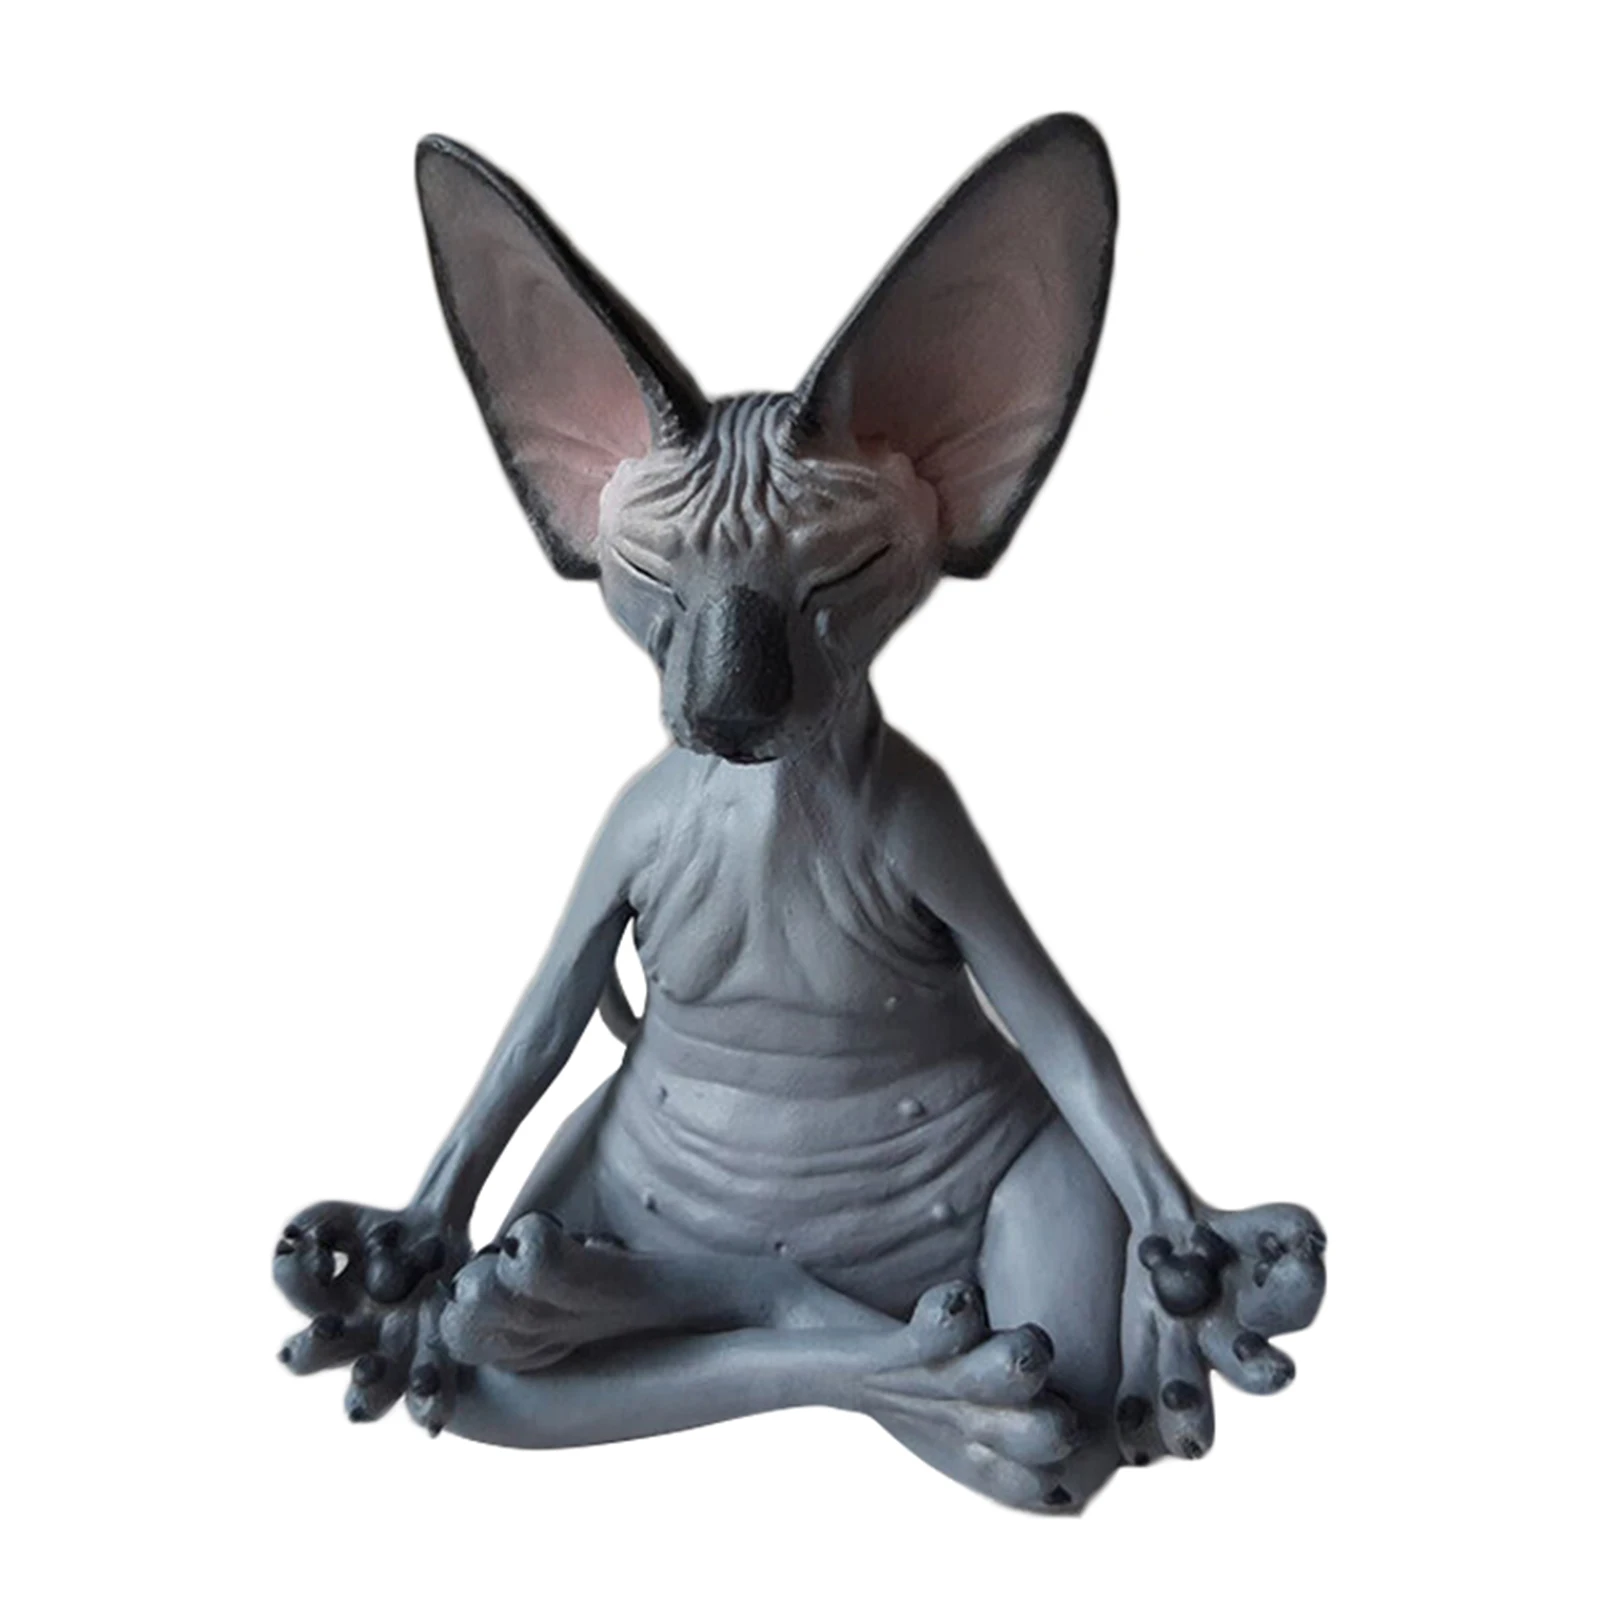 

Sphynx Cat Meditate Statue Cute Hairless Cat Yoga Sitting Collectible Figure for Room Desk Decoration jlrr